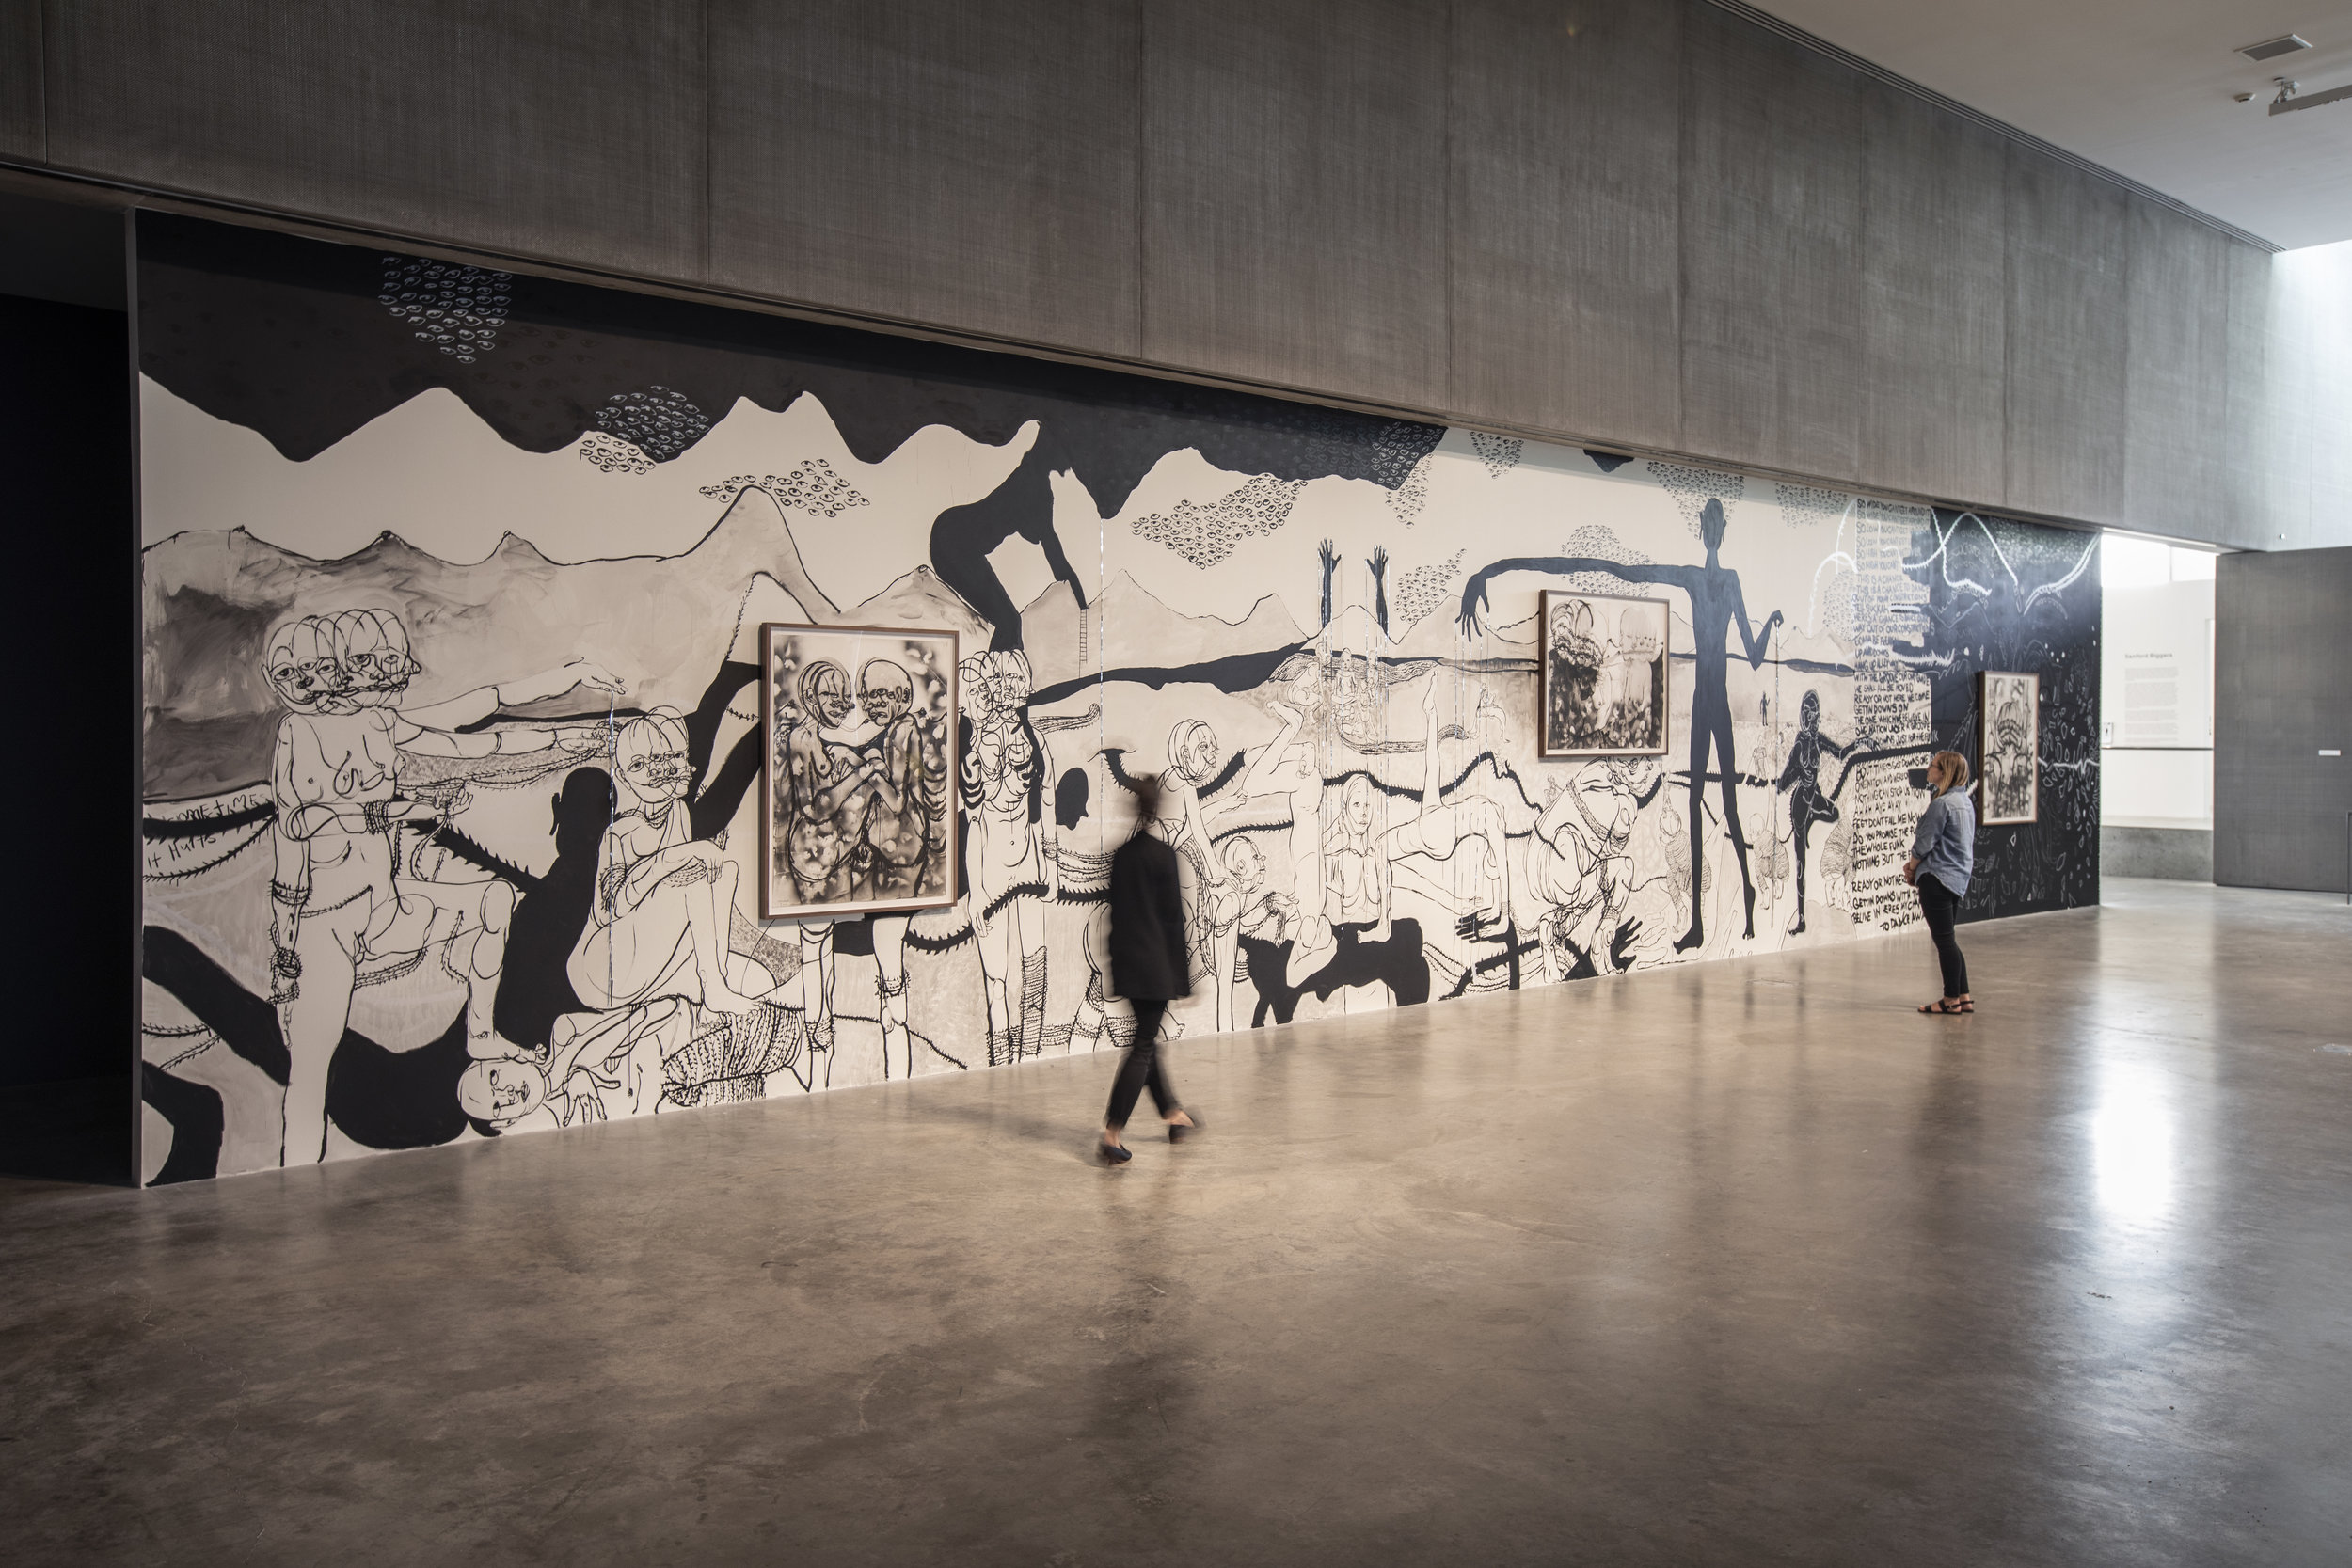    Sometimes it hurts  , 2018  12.5 x 60 ft.  Ink wash and acrylic paint  Installation view,  William Downs: Sometimes it hurts , Contemporary Art Museum St. Louis, September 7–December 30, 2018.  Photo: Dusty Kessler. 